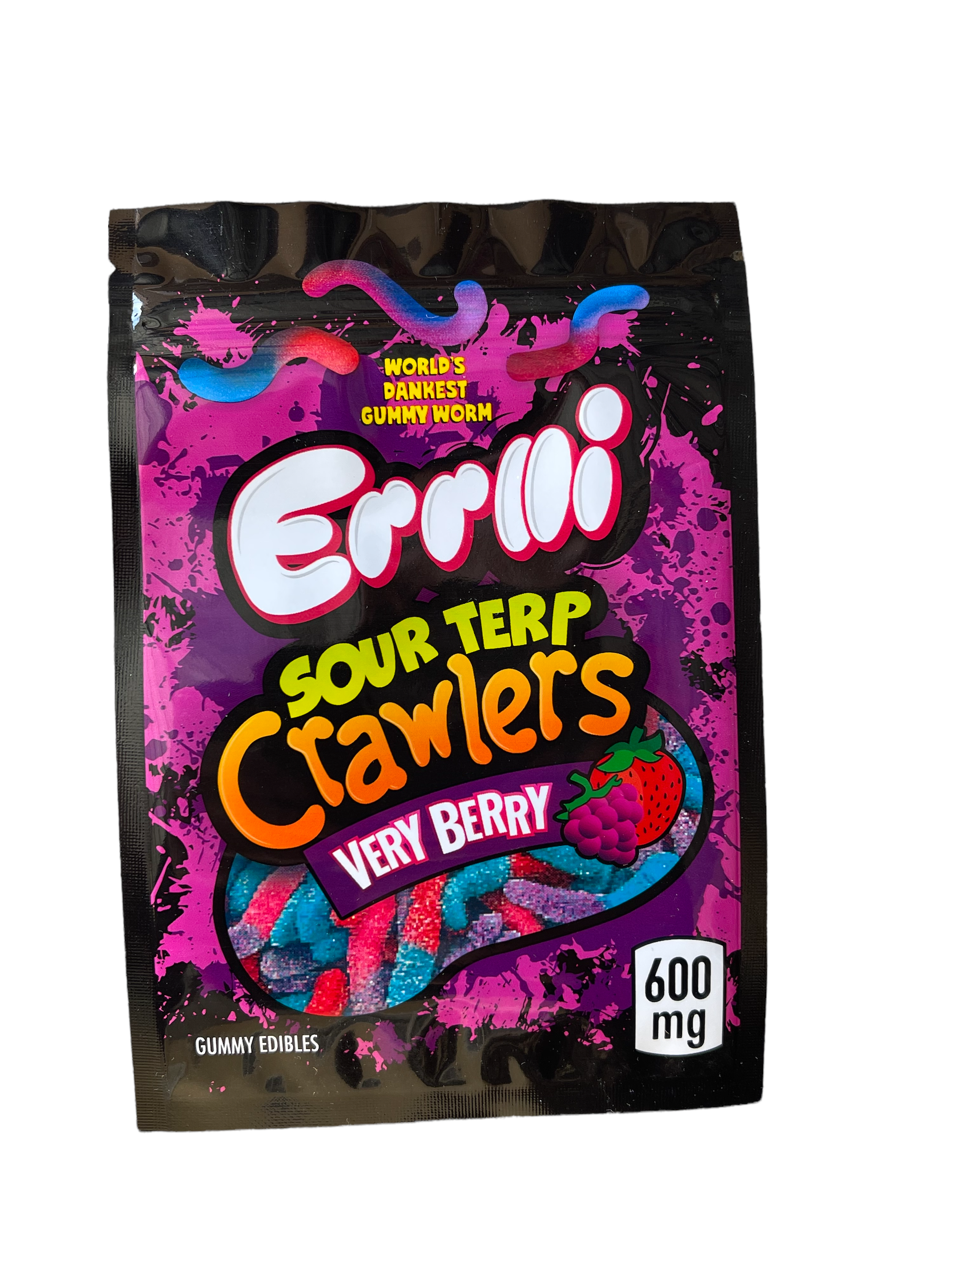 Errlli Sour Terp Very Berry Crawlers 600mg Mylar bags packaging only 4x6